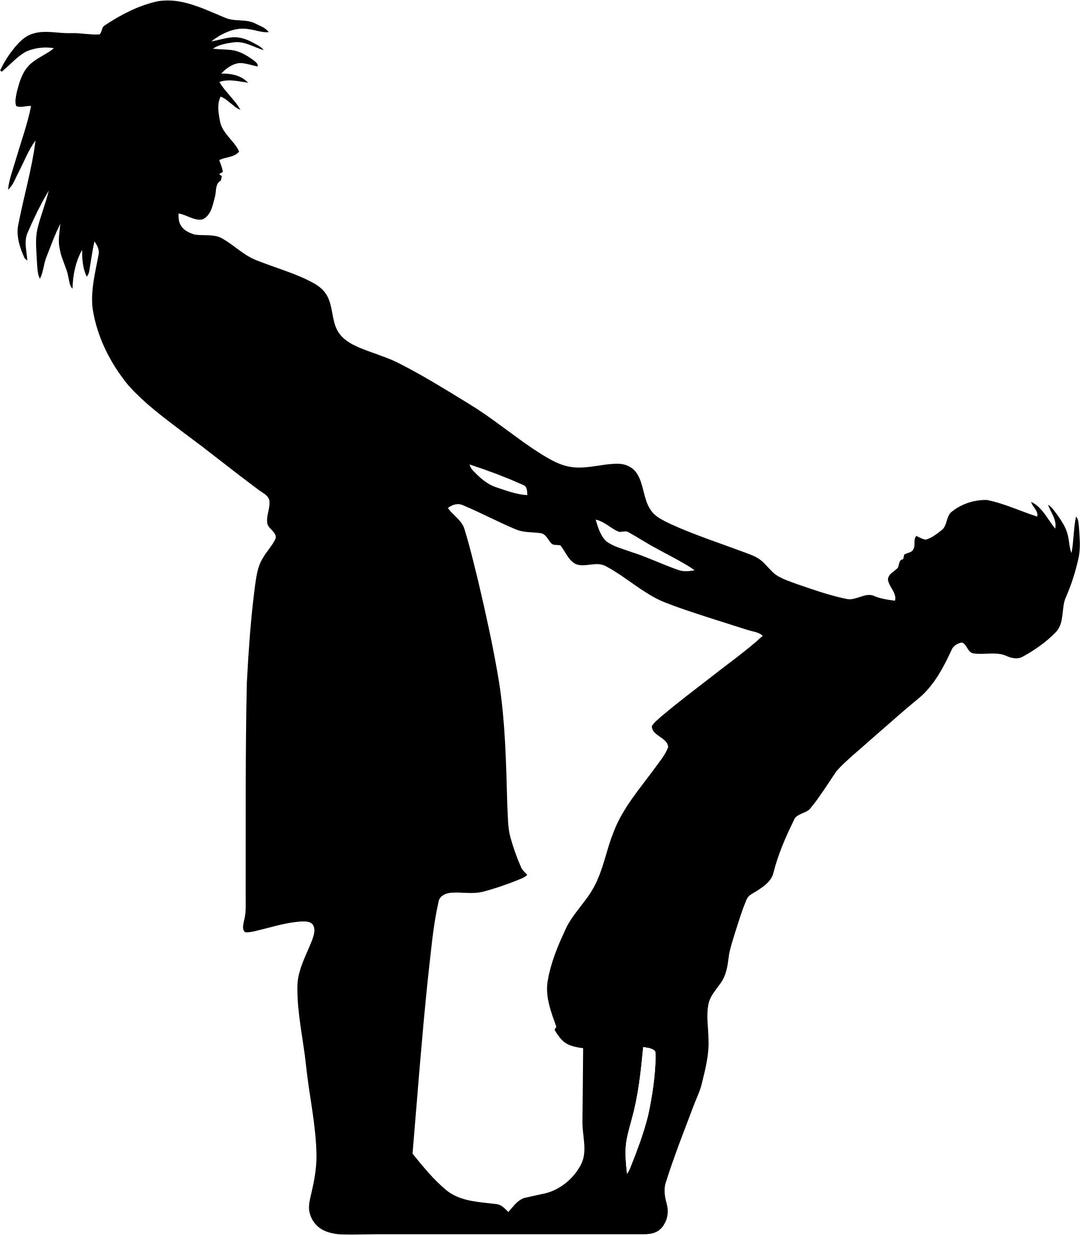 Mother And Son Minus Ground Silhouette png transparent